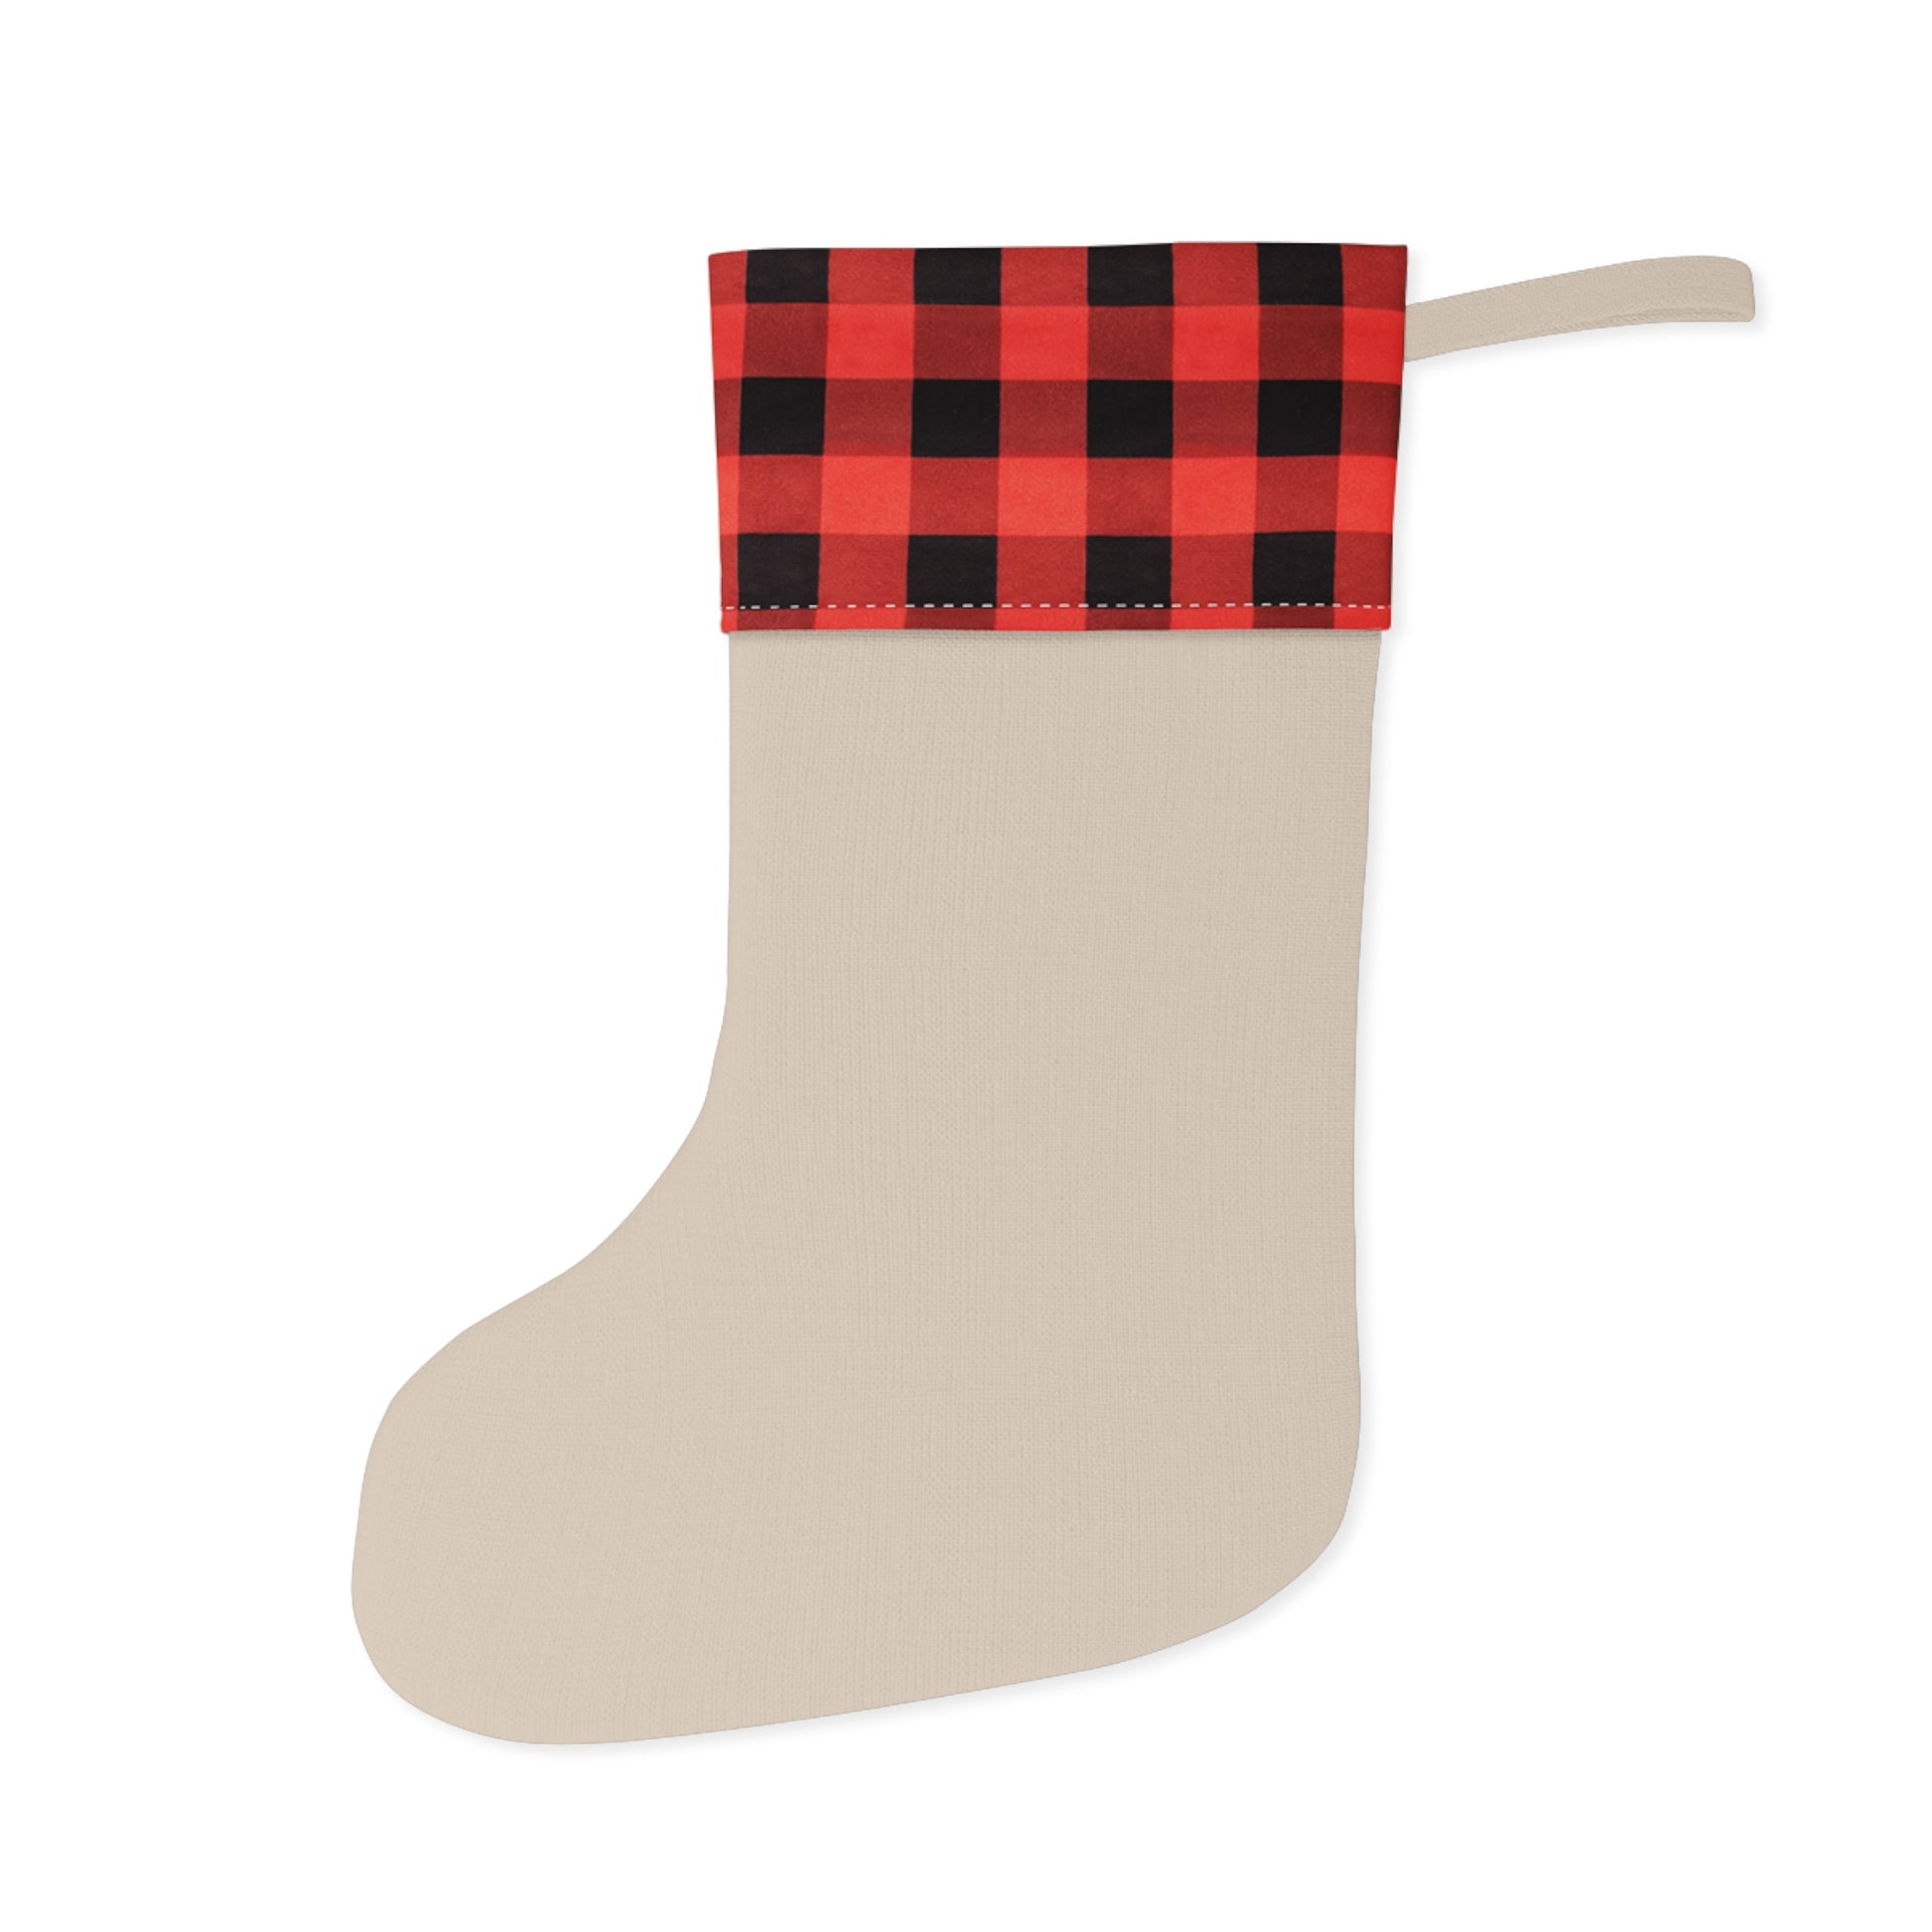 This Printify Santa-Dog Christmas stocking on a white background adds a personalized touch to your holiday decor.